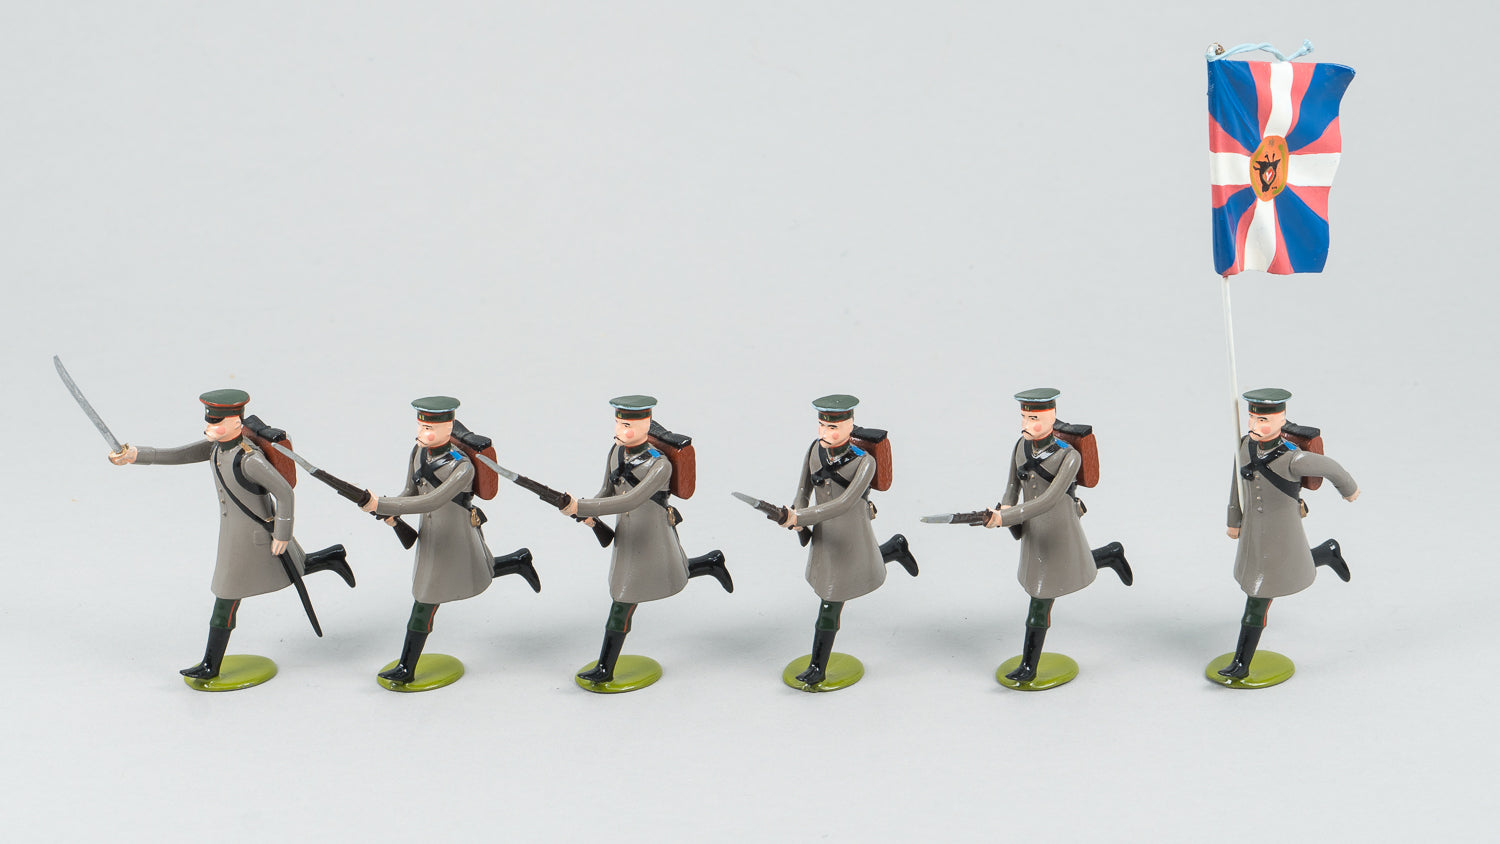 85 Russian Light Infantry charging